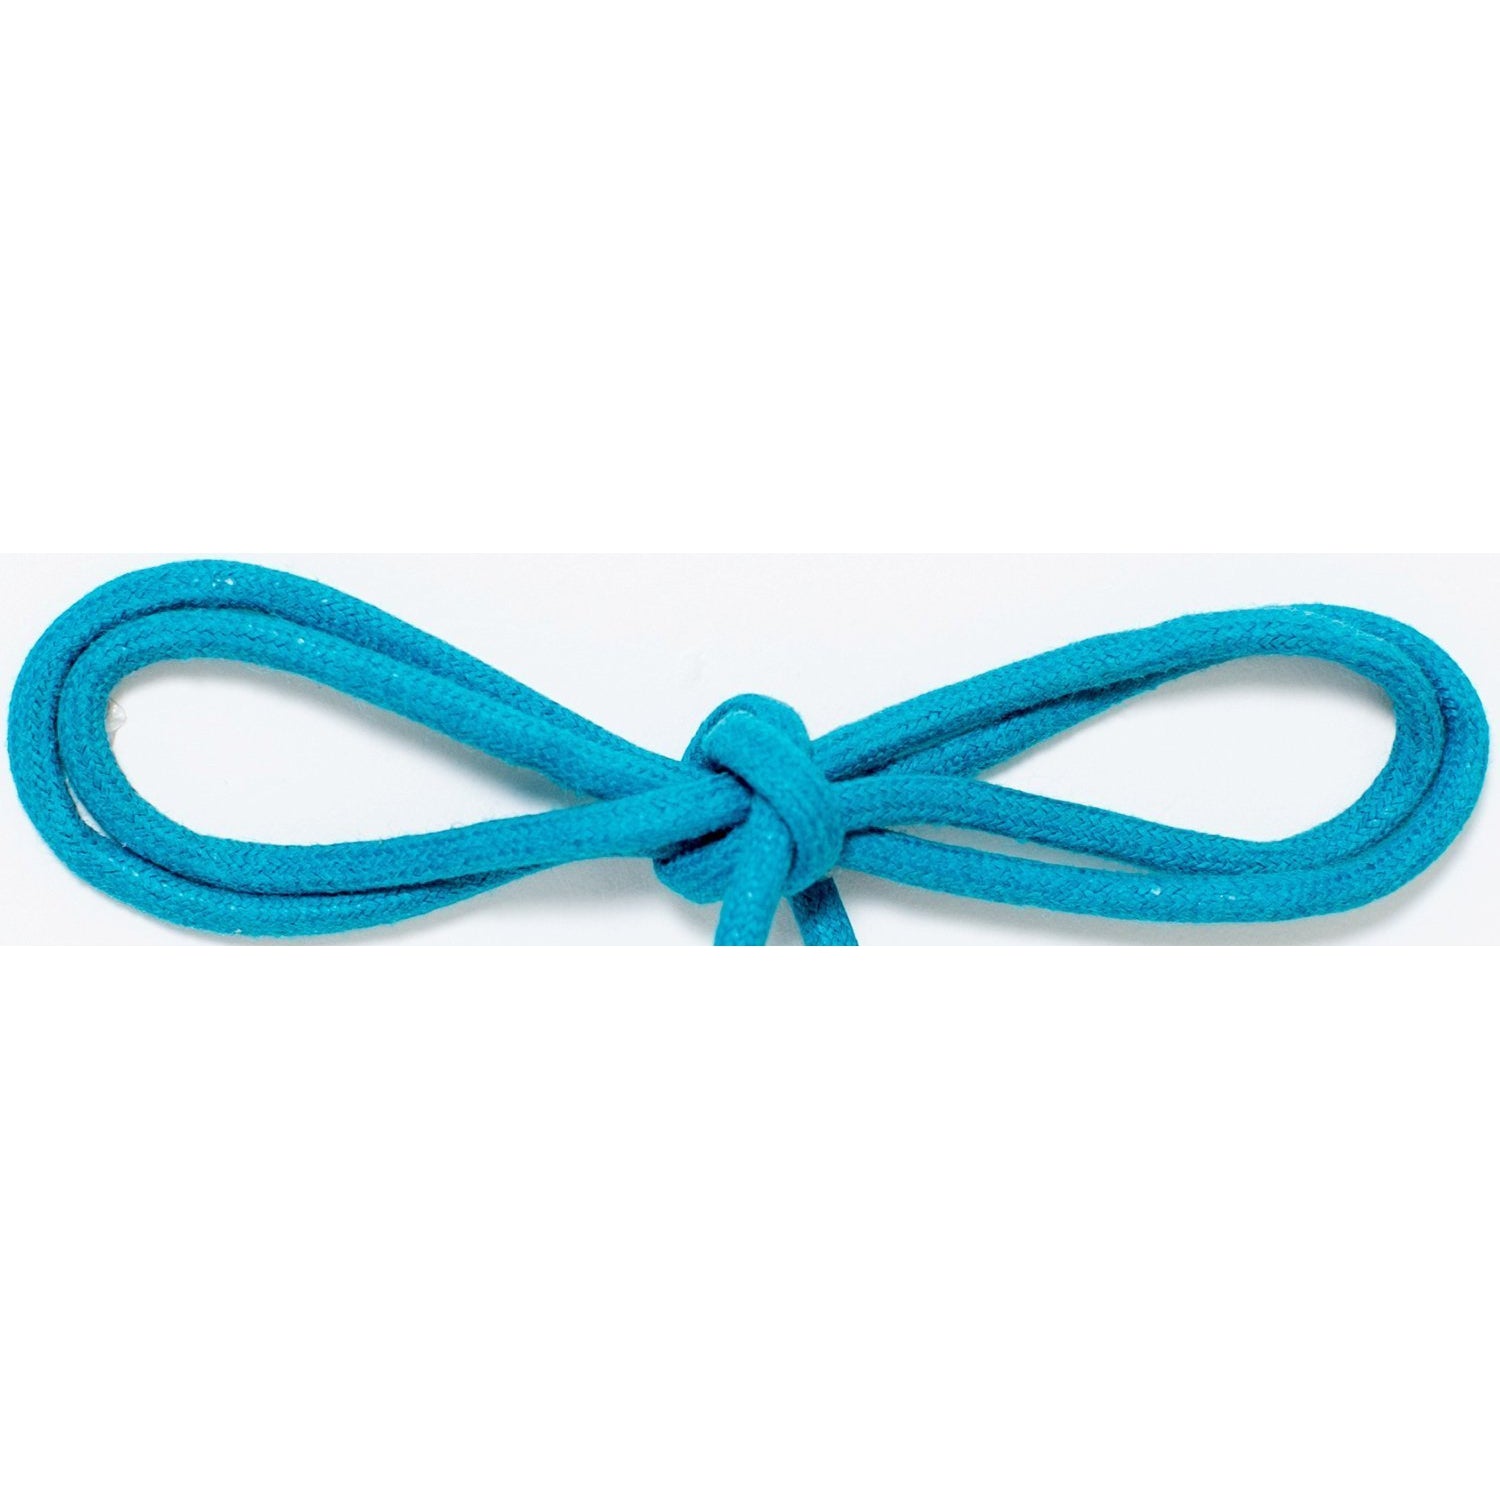 Wholesale Waxed Cotton Thin Round DRESS Laces 1/8'' - Turquoise (12 Pair Pack) Shoelaces